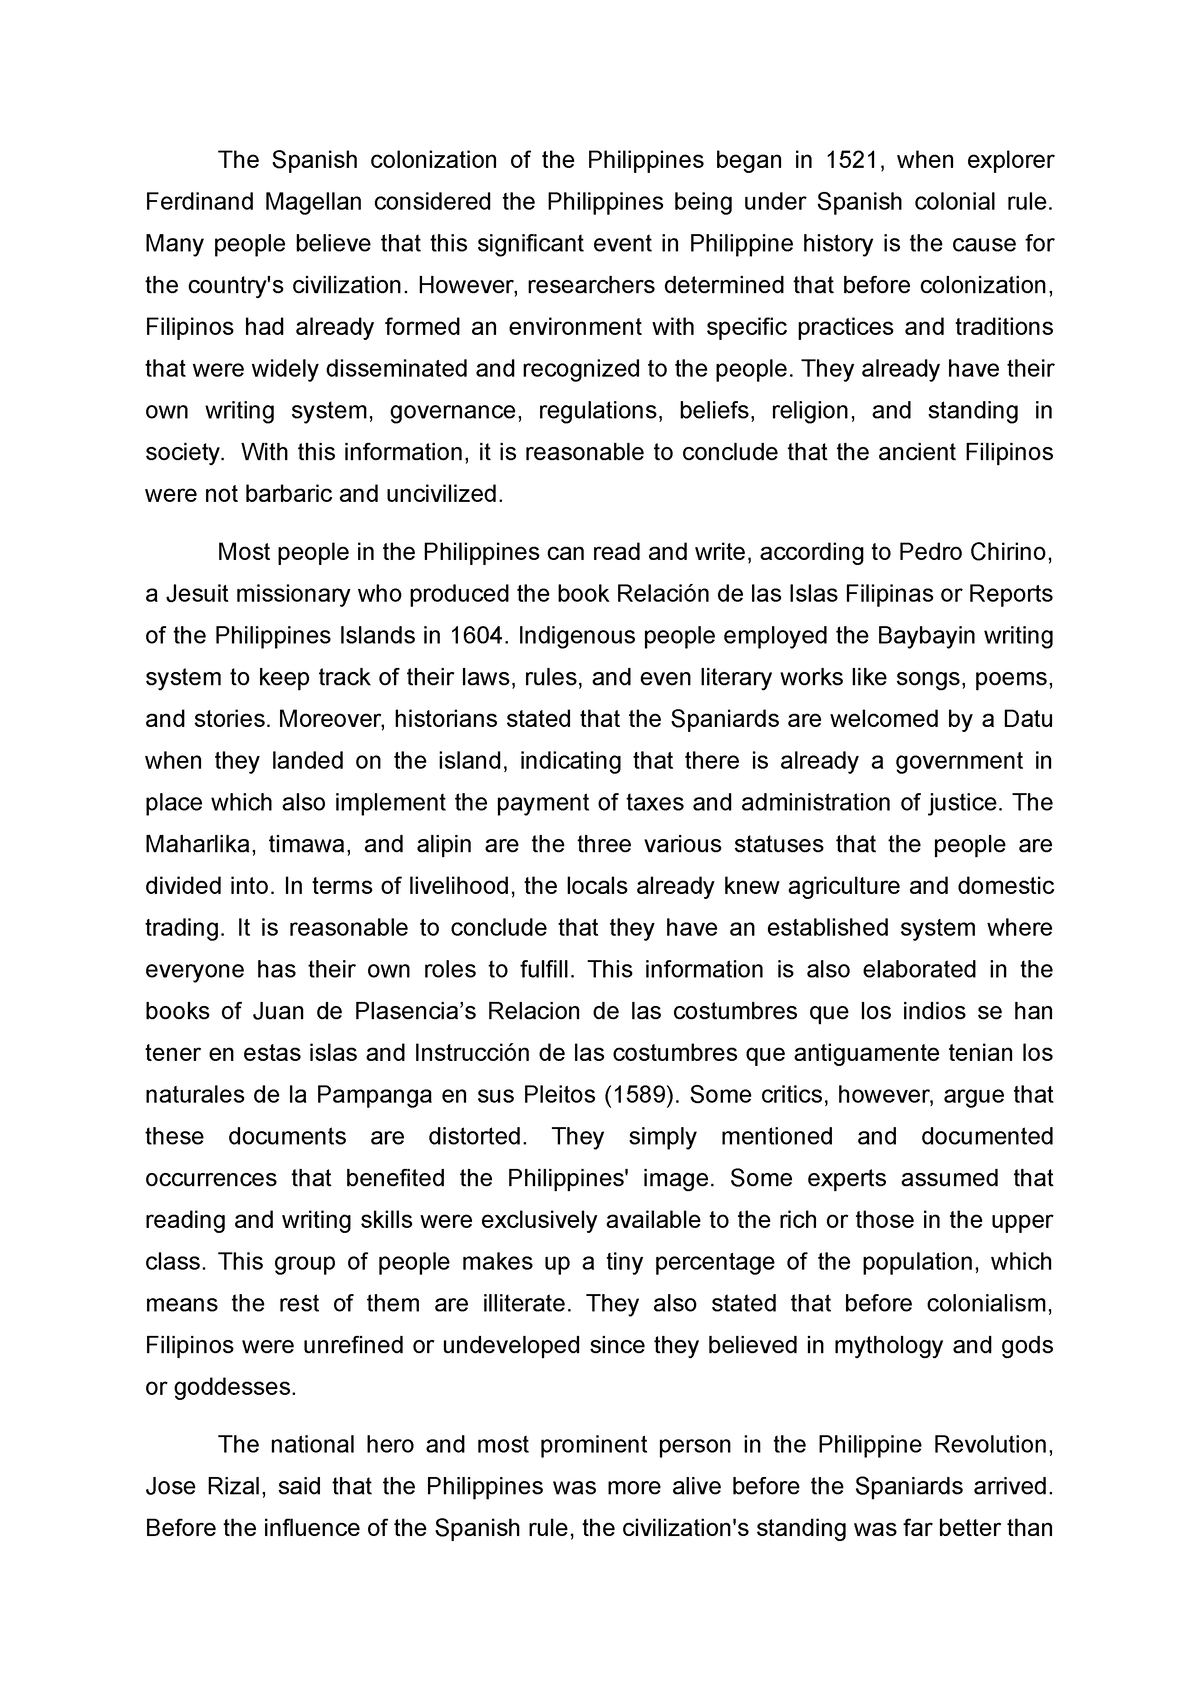 essay about spanish colonization in the philippines